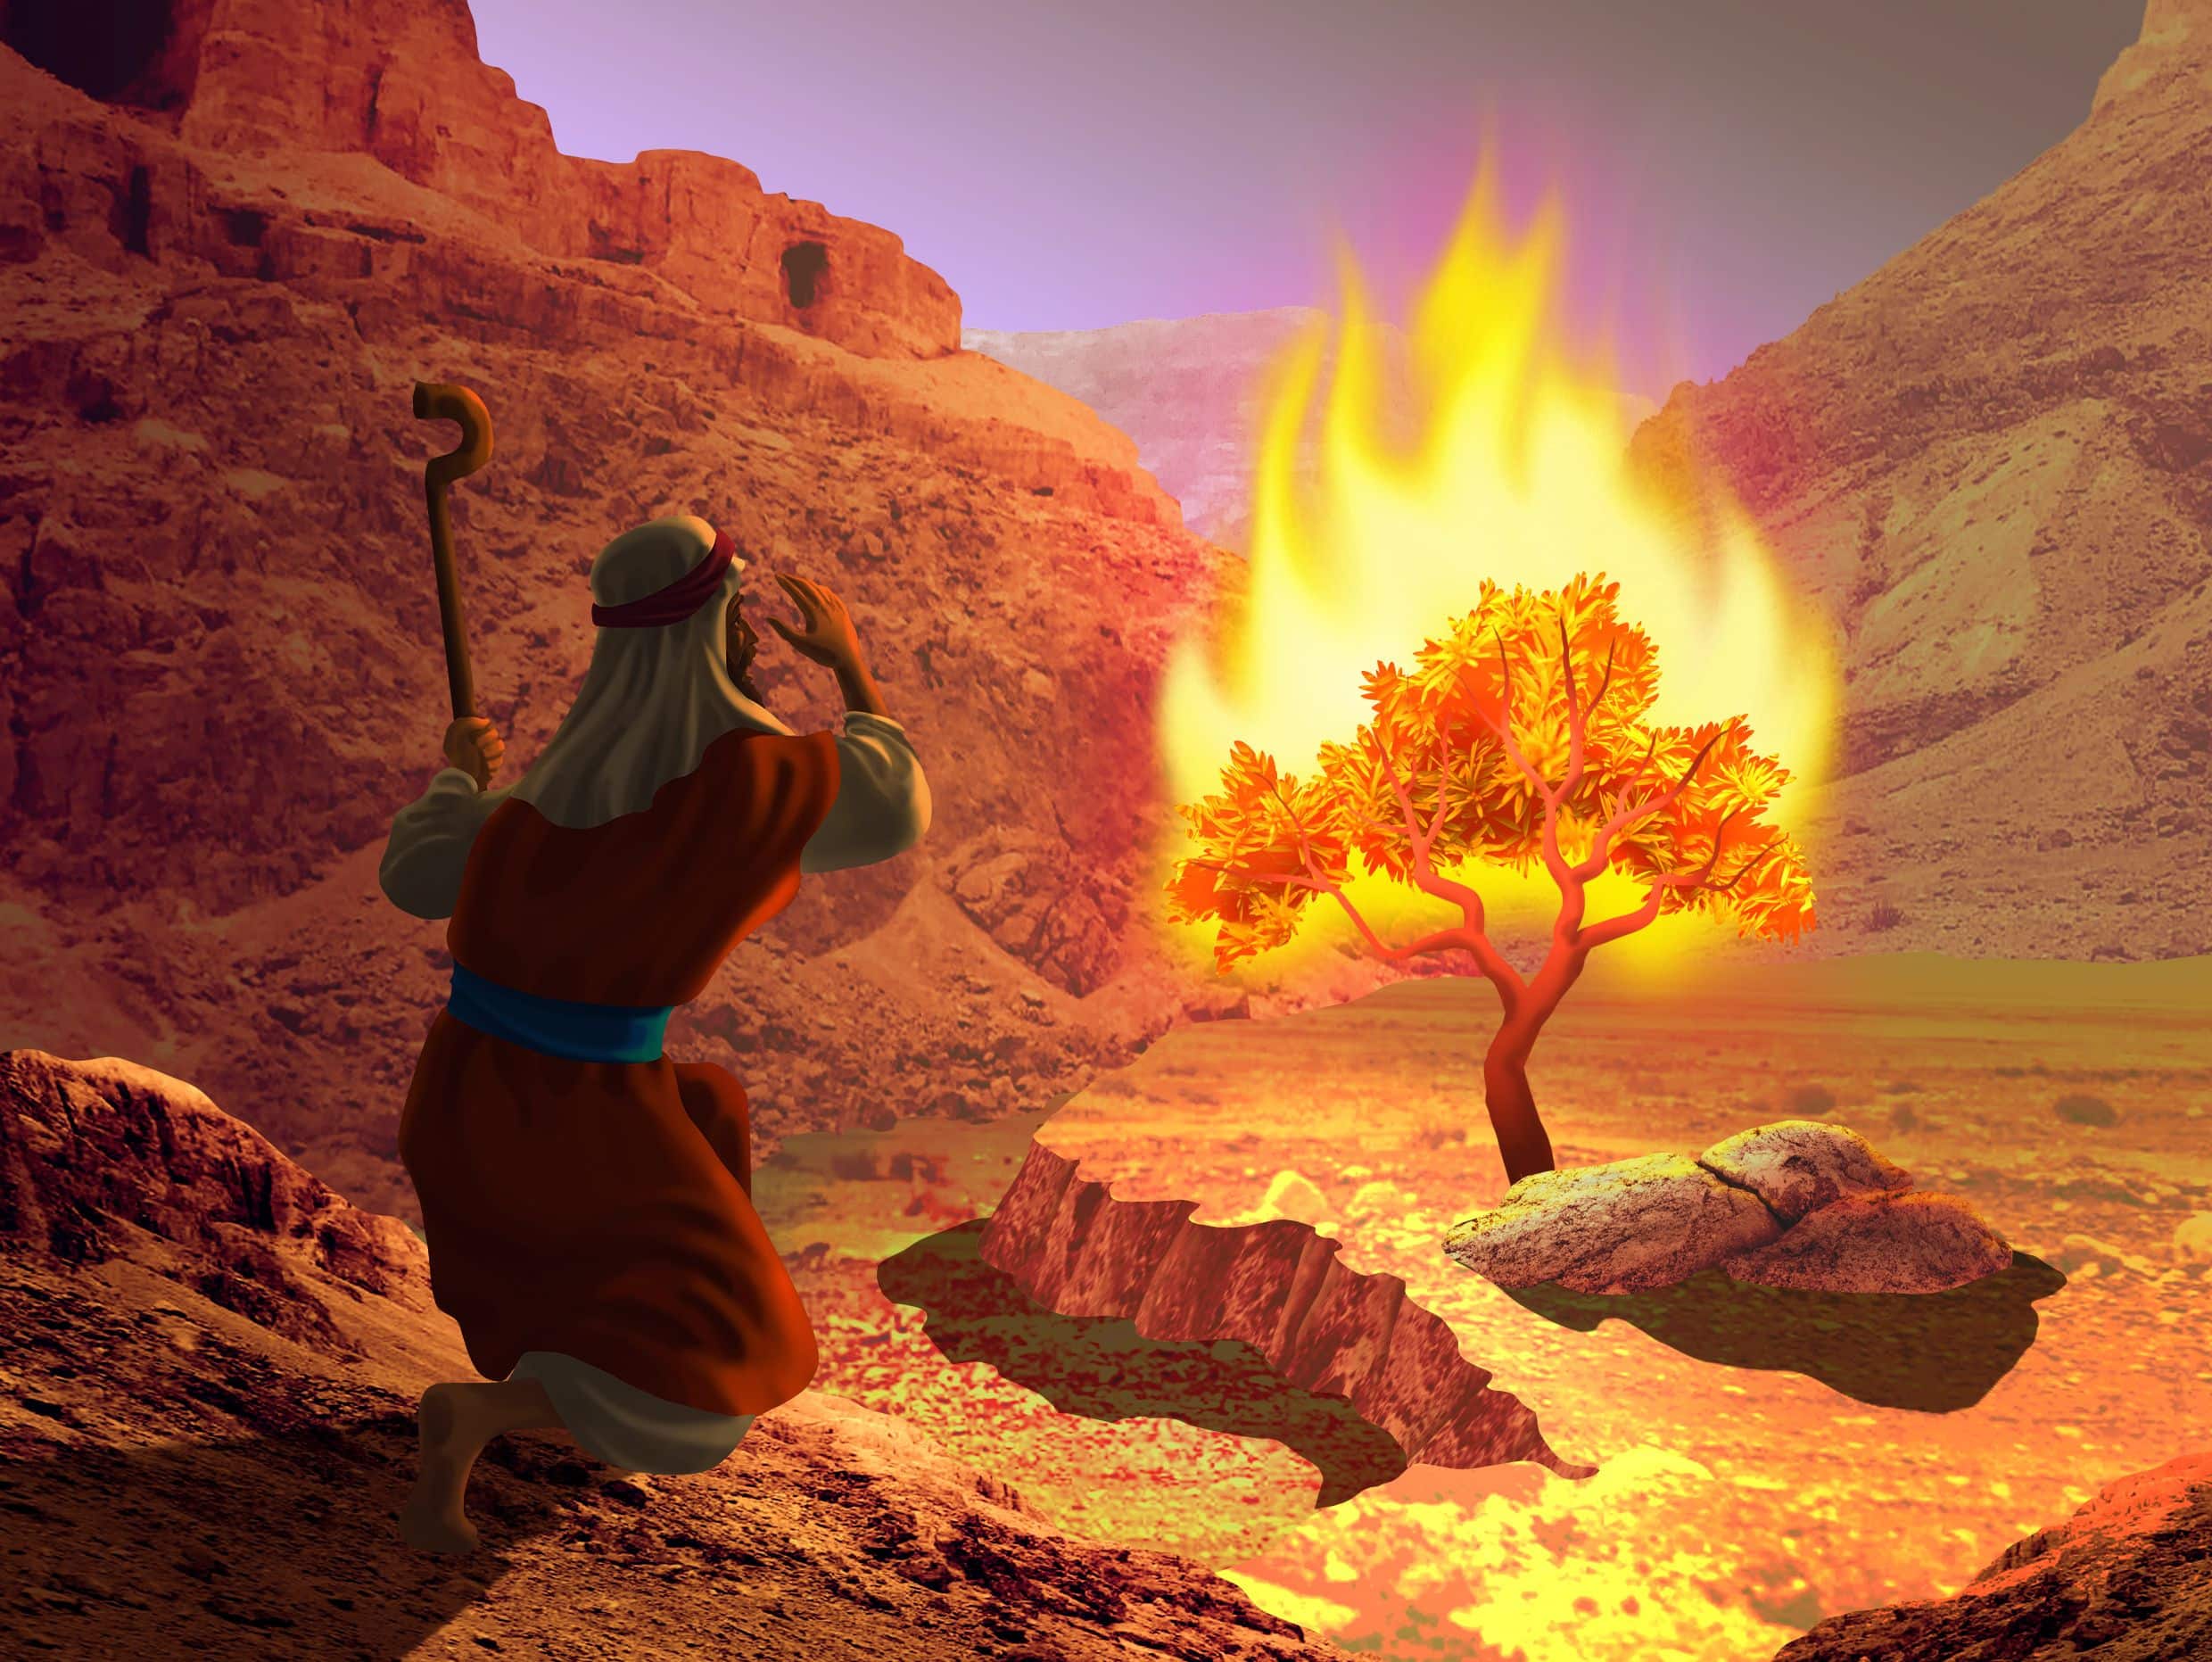 Getaway Issues: Was the Bush Burning Or Was Moses Blazed?